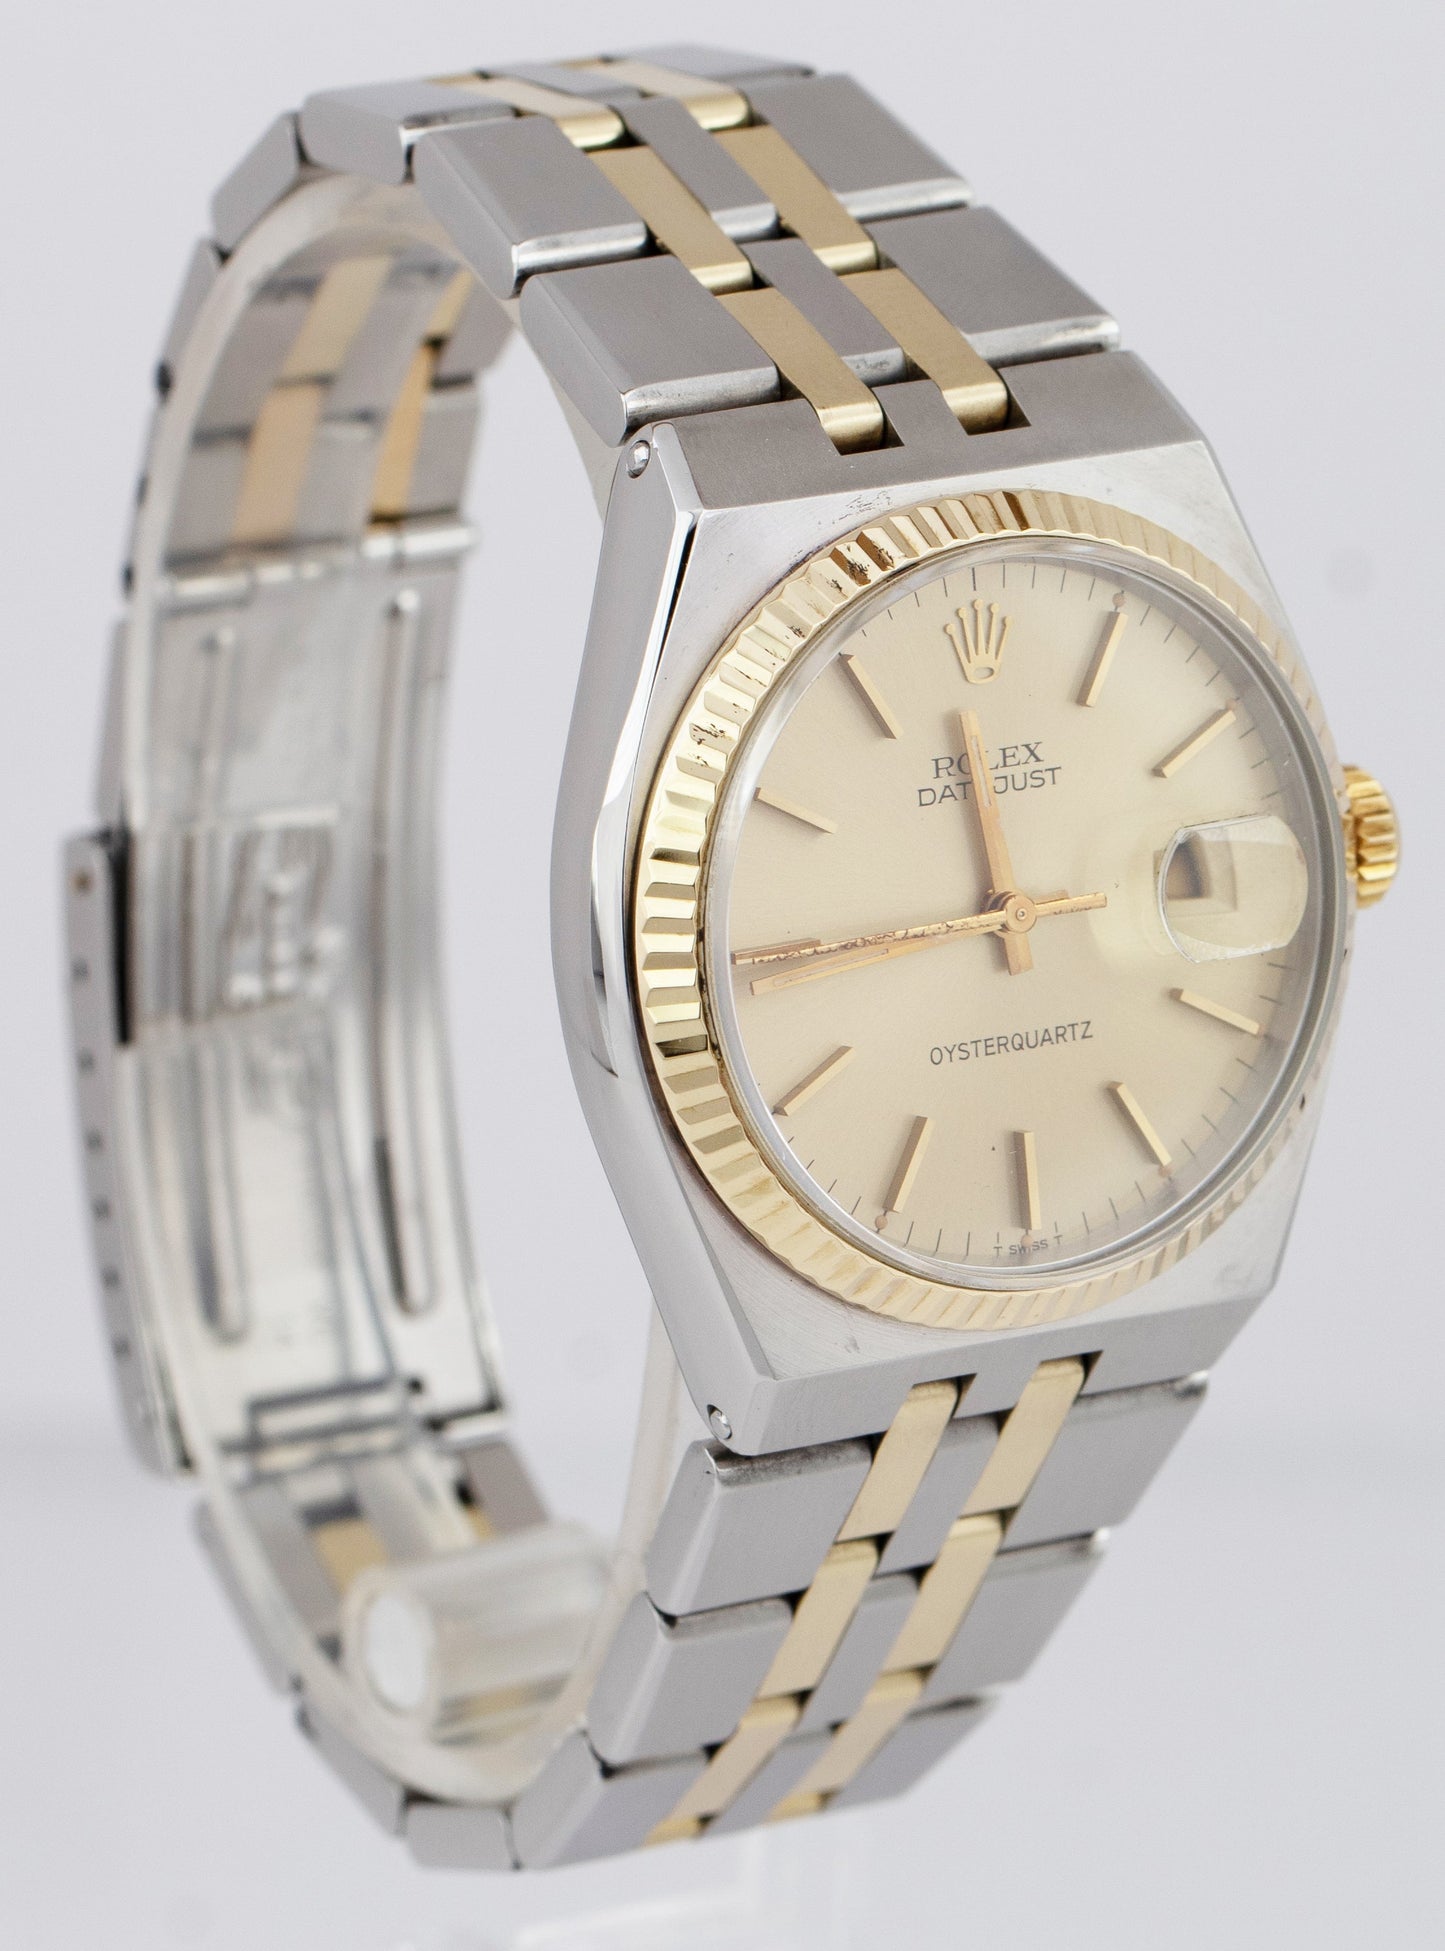 Rolex Oysterquartz DateJust Two-Tone 18K Yellow Gold Stainless Steel Watch 17013